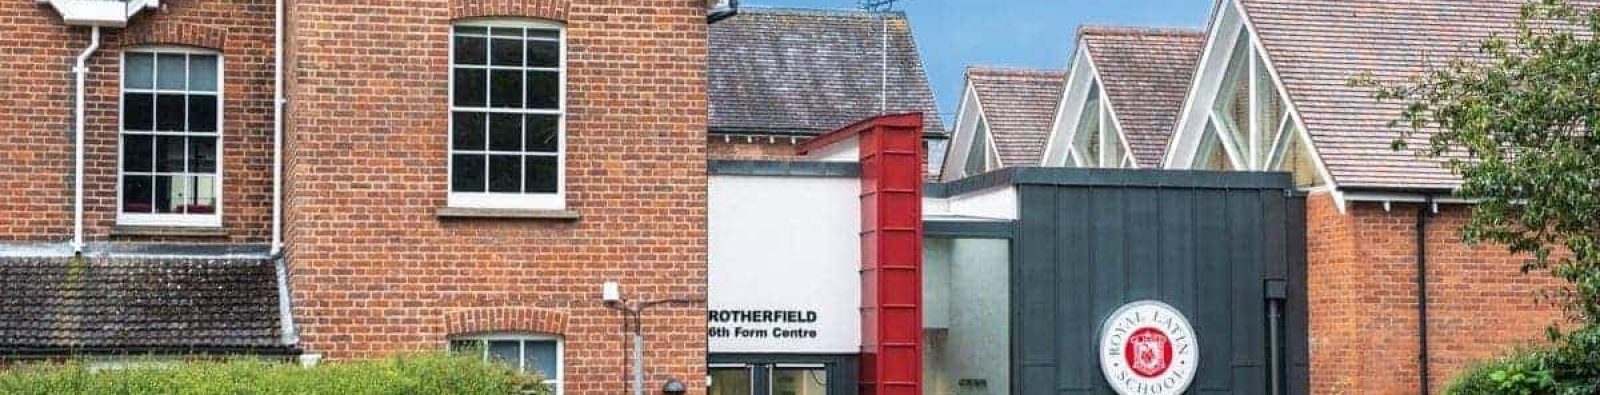 Rotherfield Sixth Form Centre